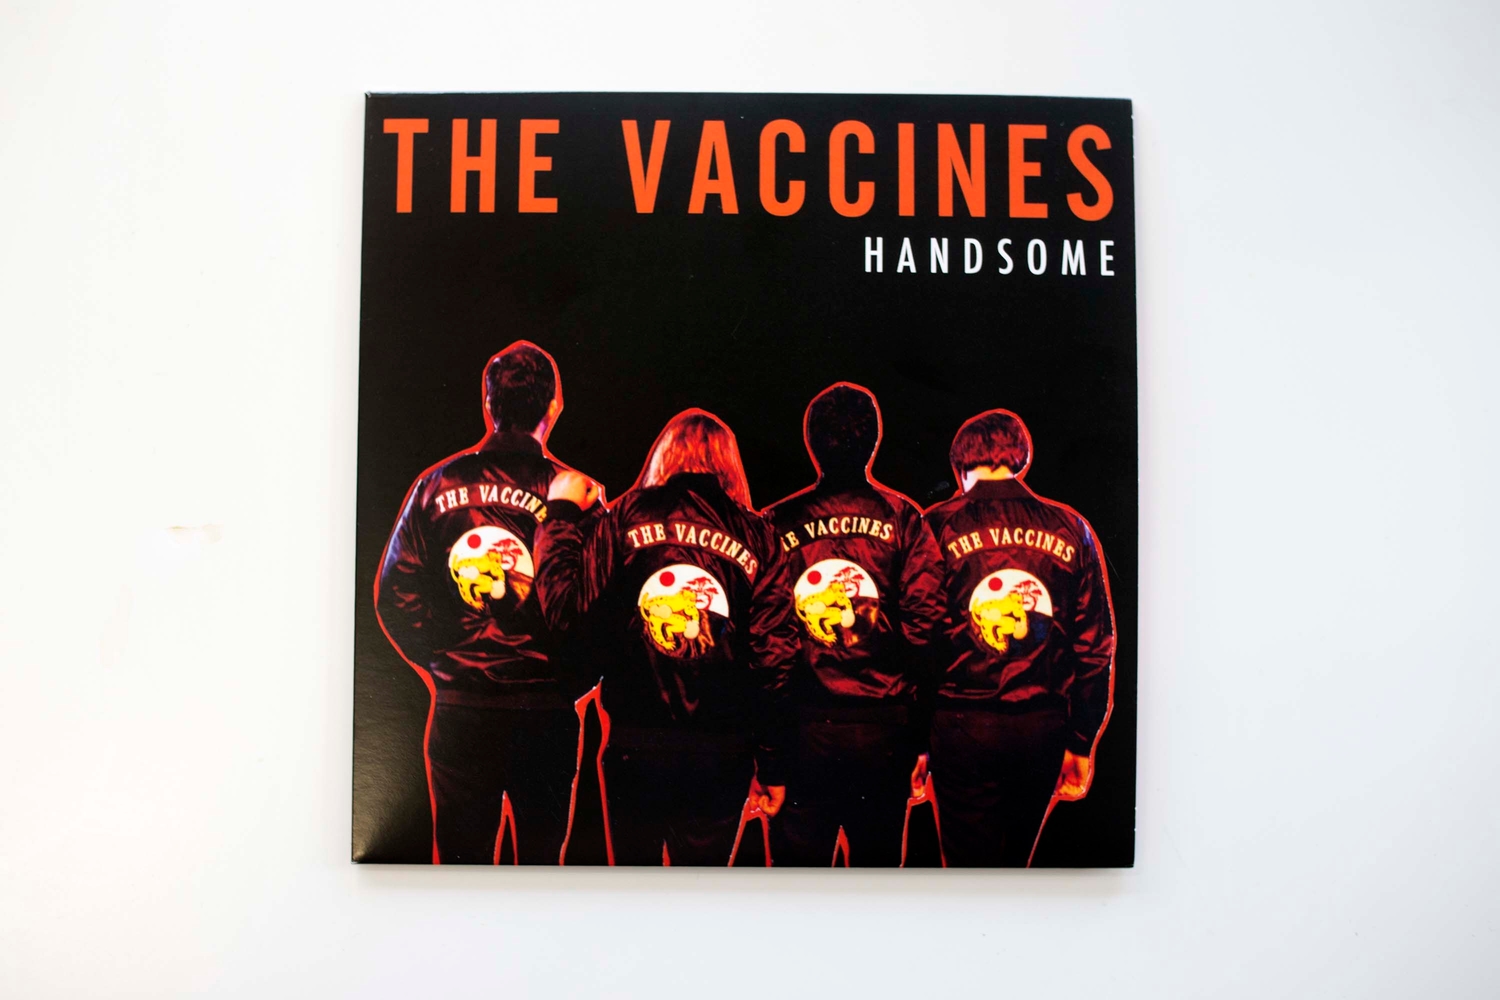 Win a copy of The Vaccines’ ‘Handsome’ 7” single